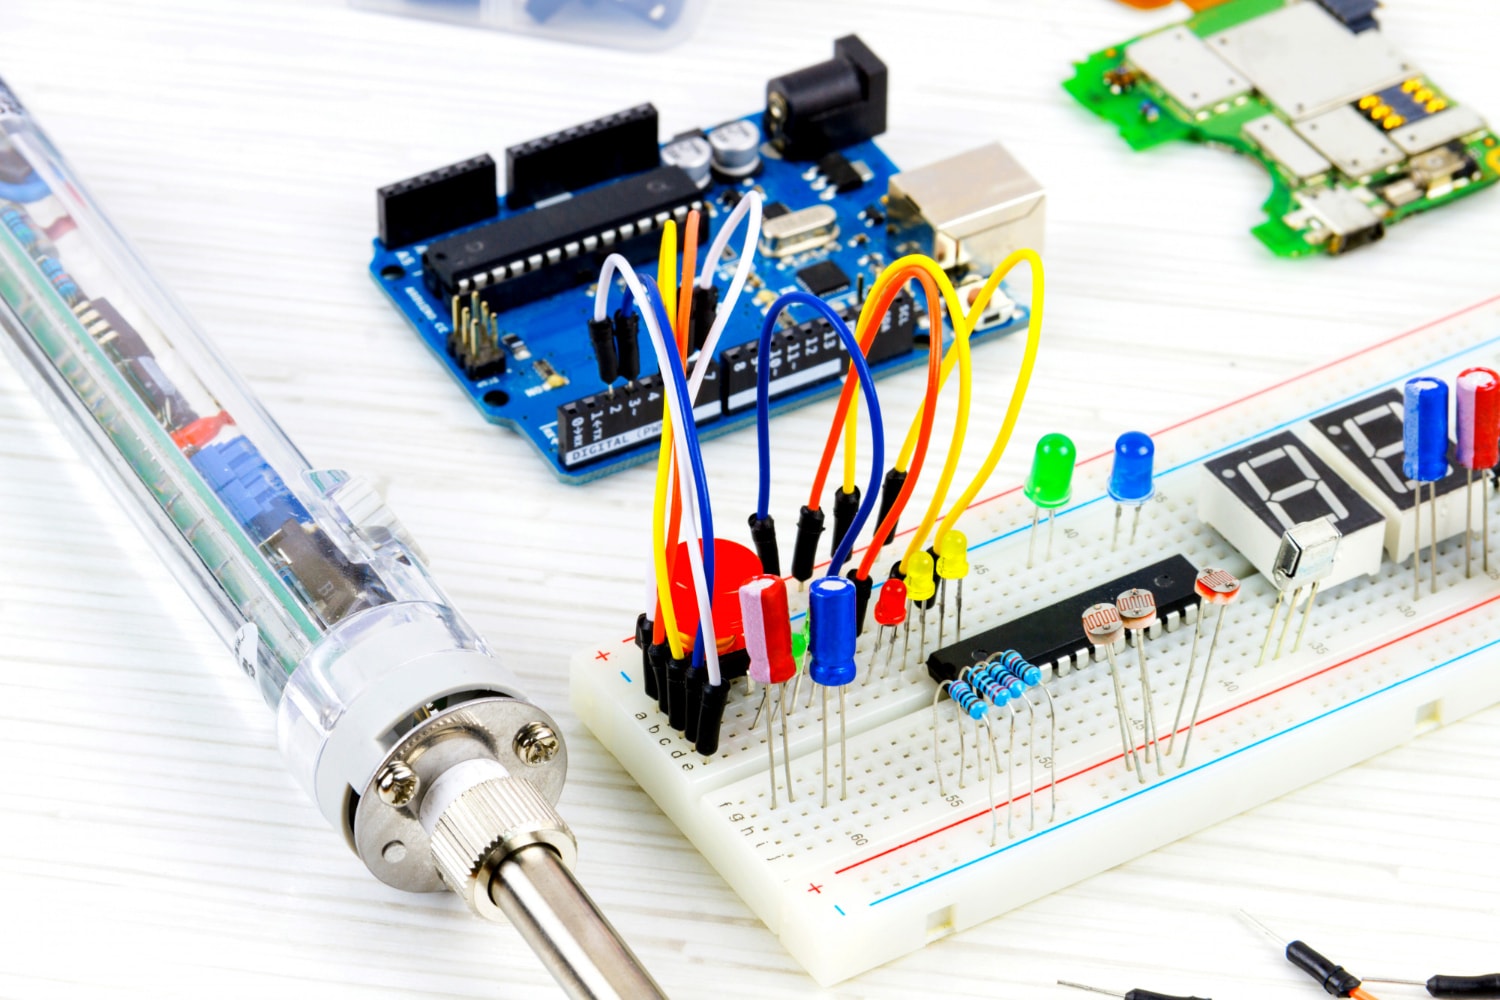 Accessories for learning electronics